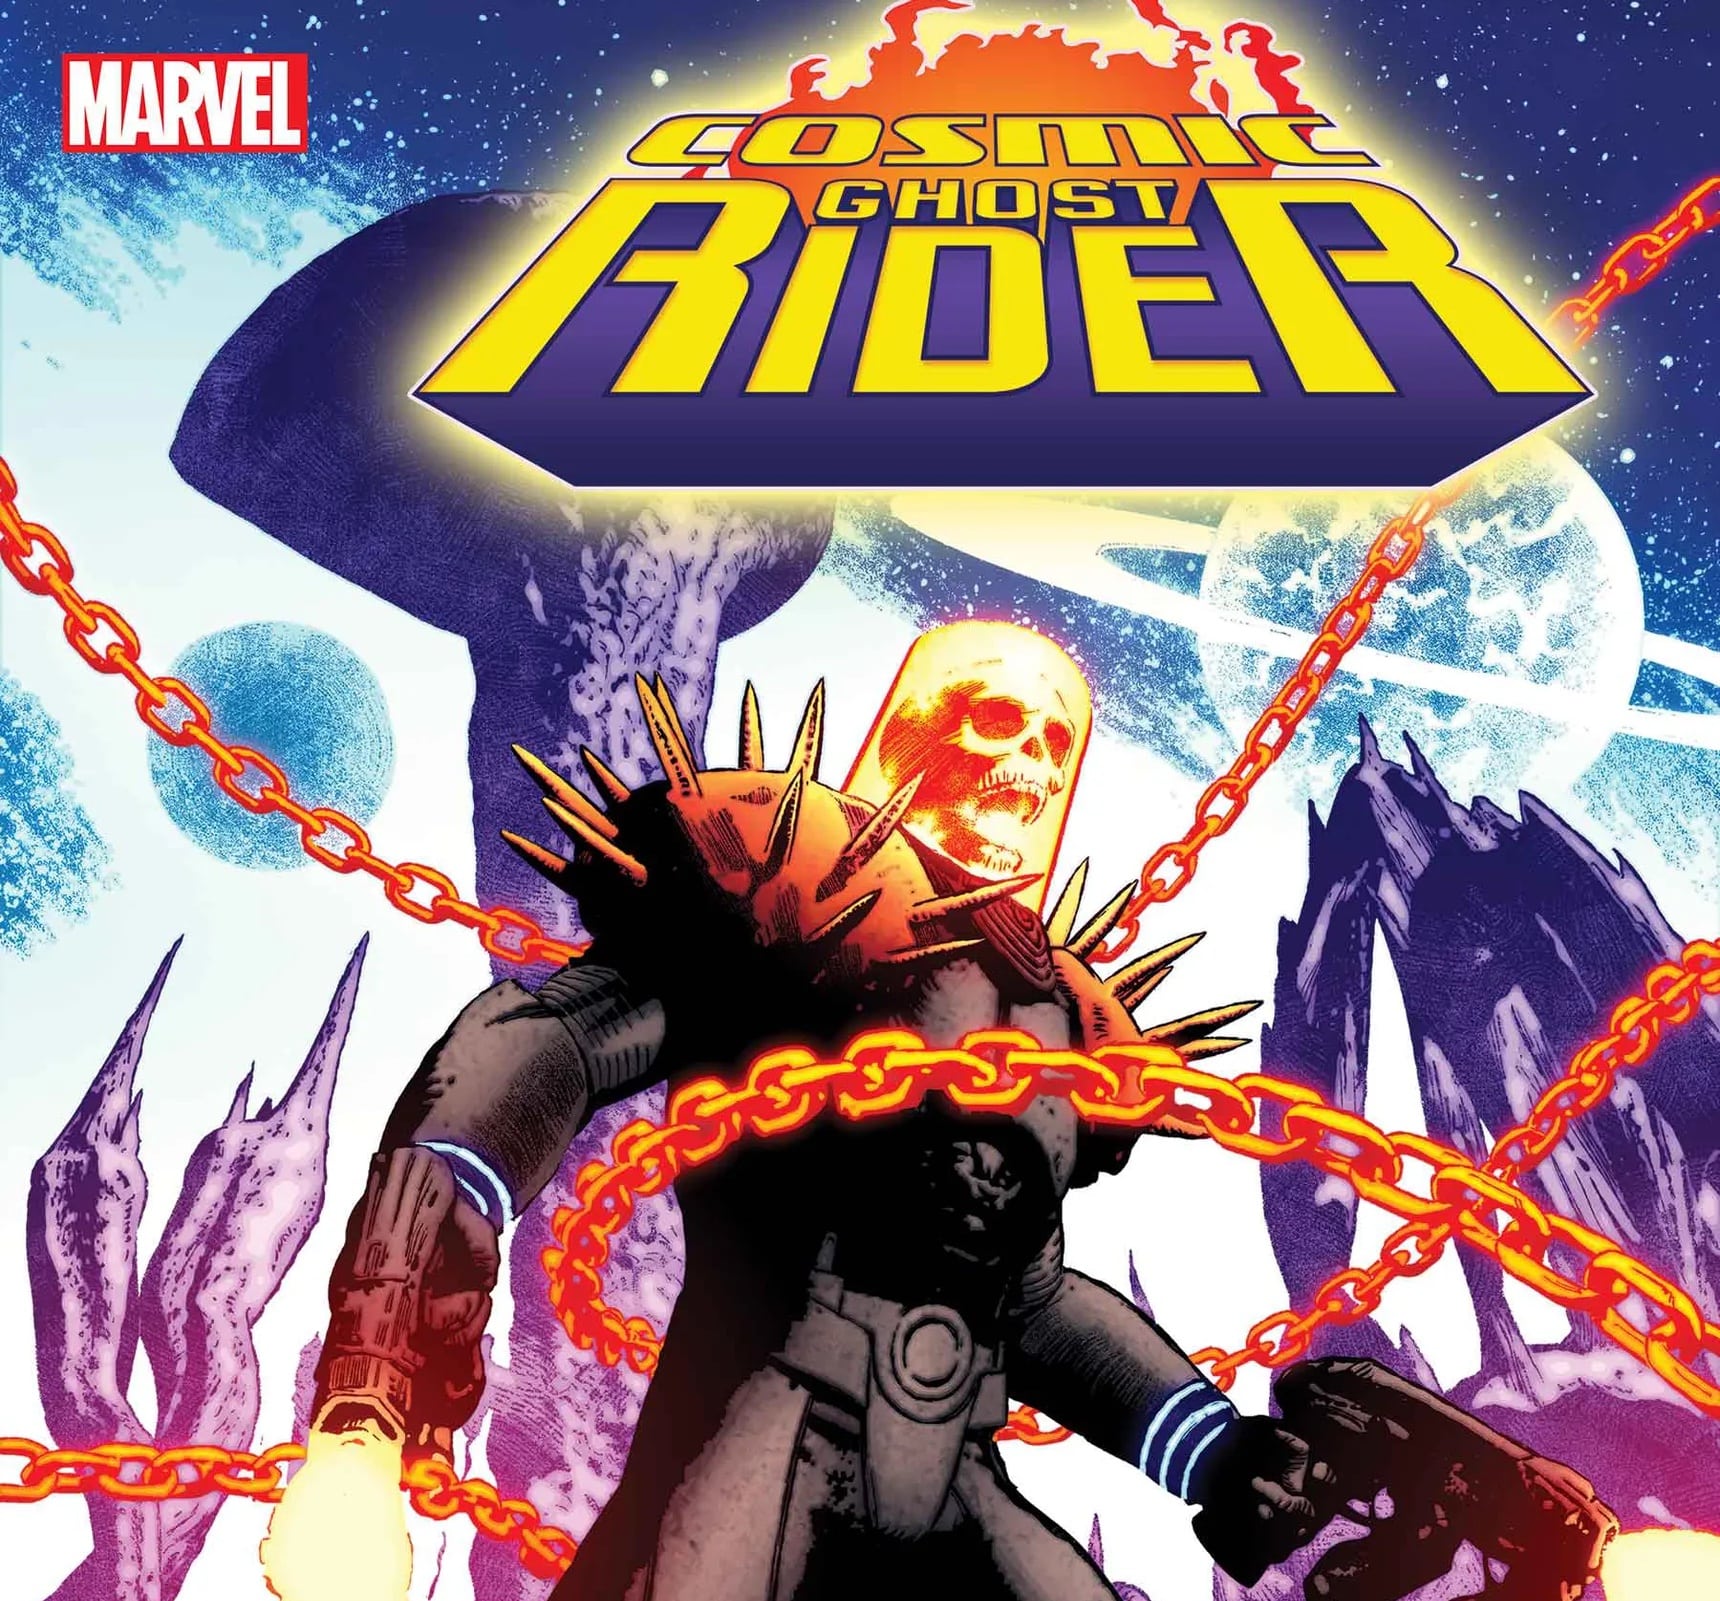 'Cosmic Ghost Rider' returns in 2023 by Stephanie Phillips and Juann Cabal